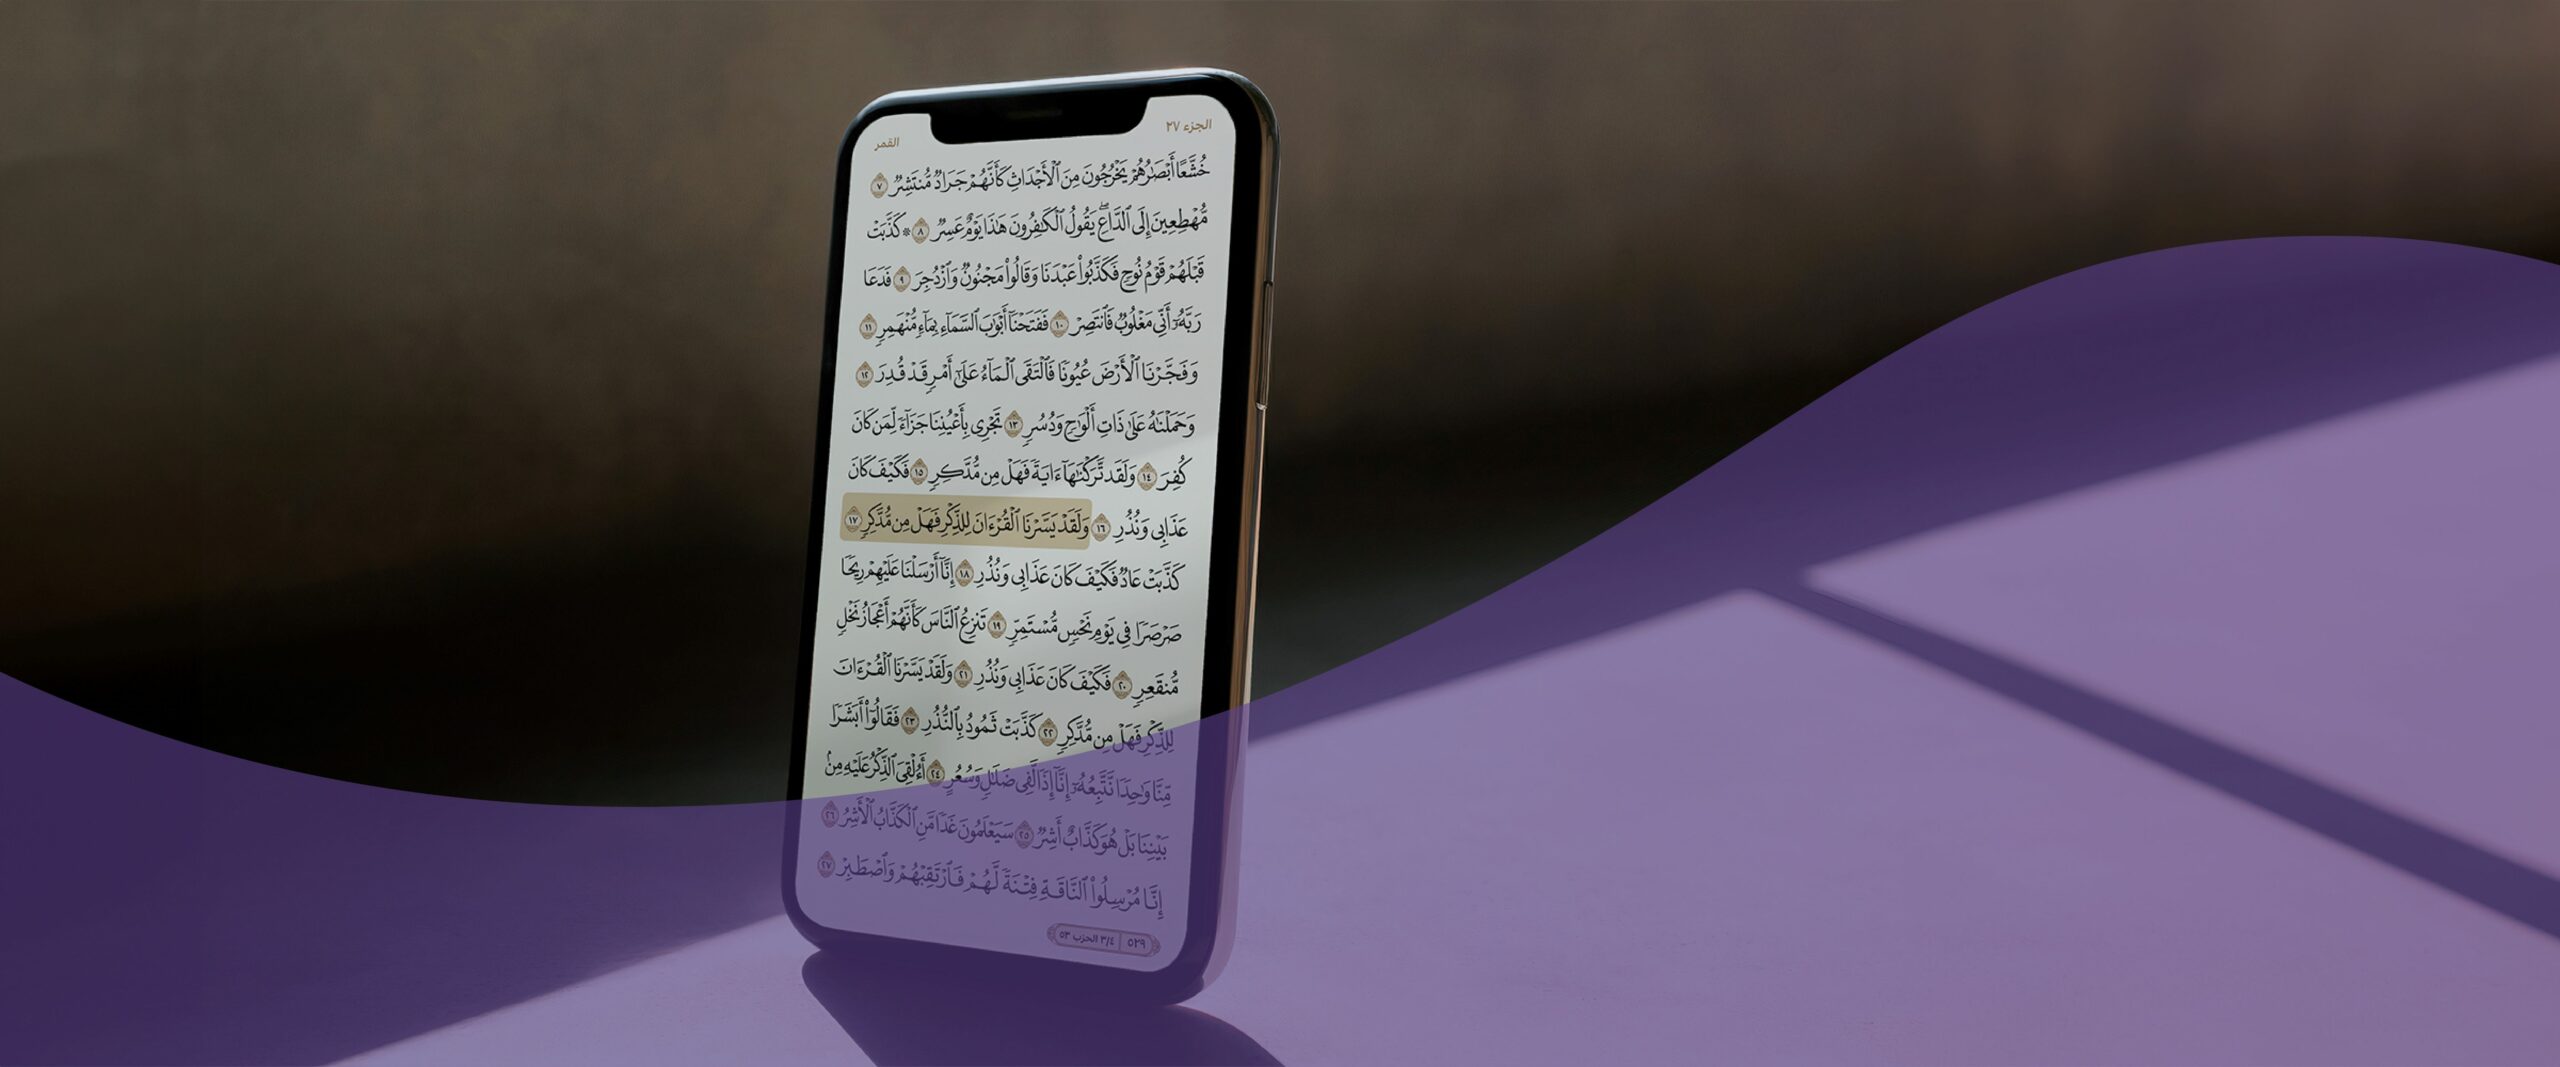 Ijazah in the Quran Online: Conditions, Importance, and How to Obtain It